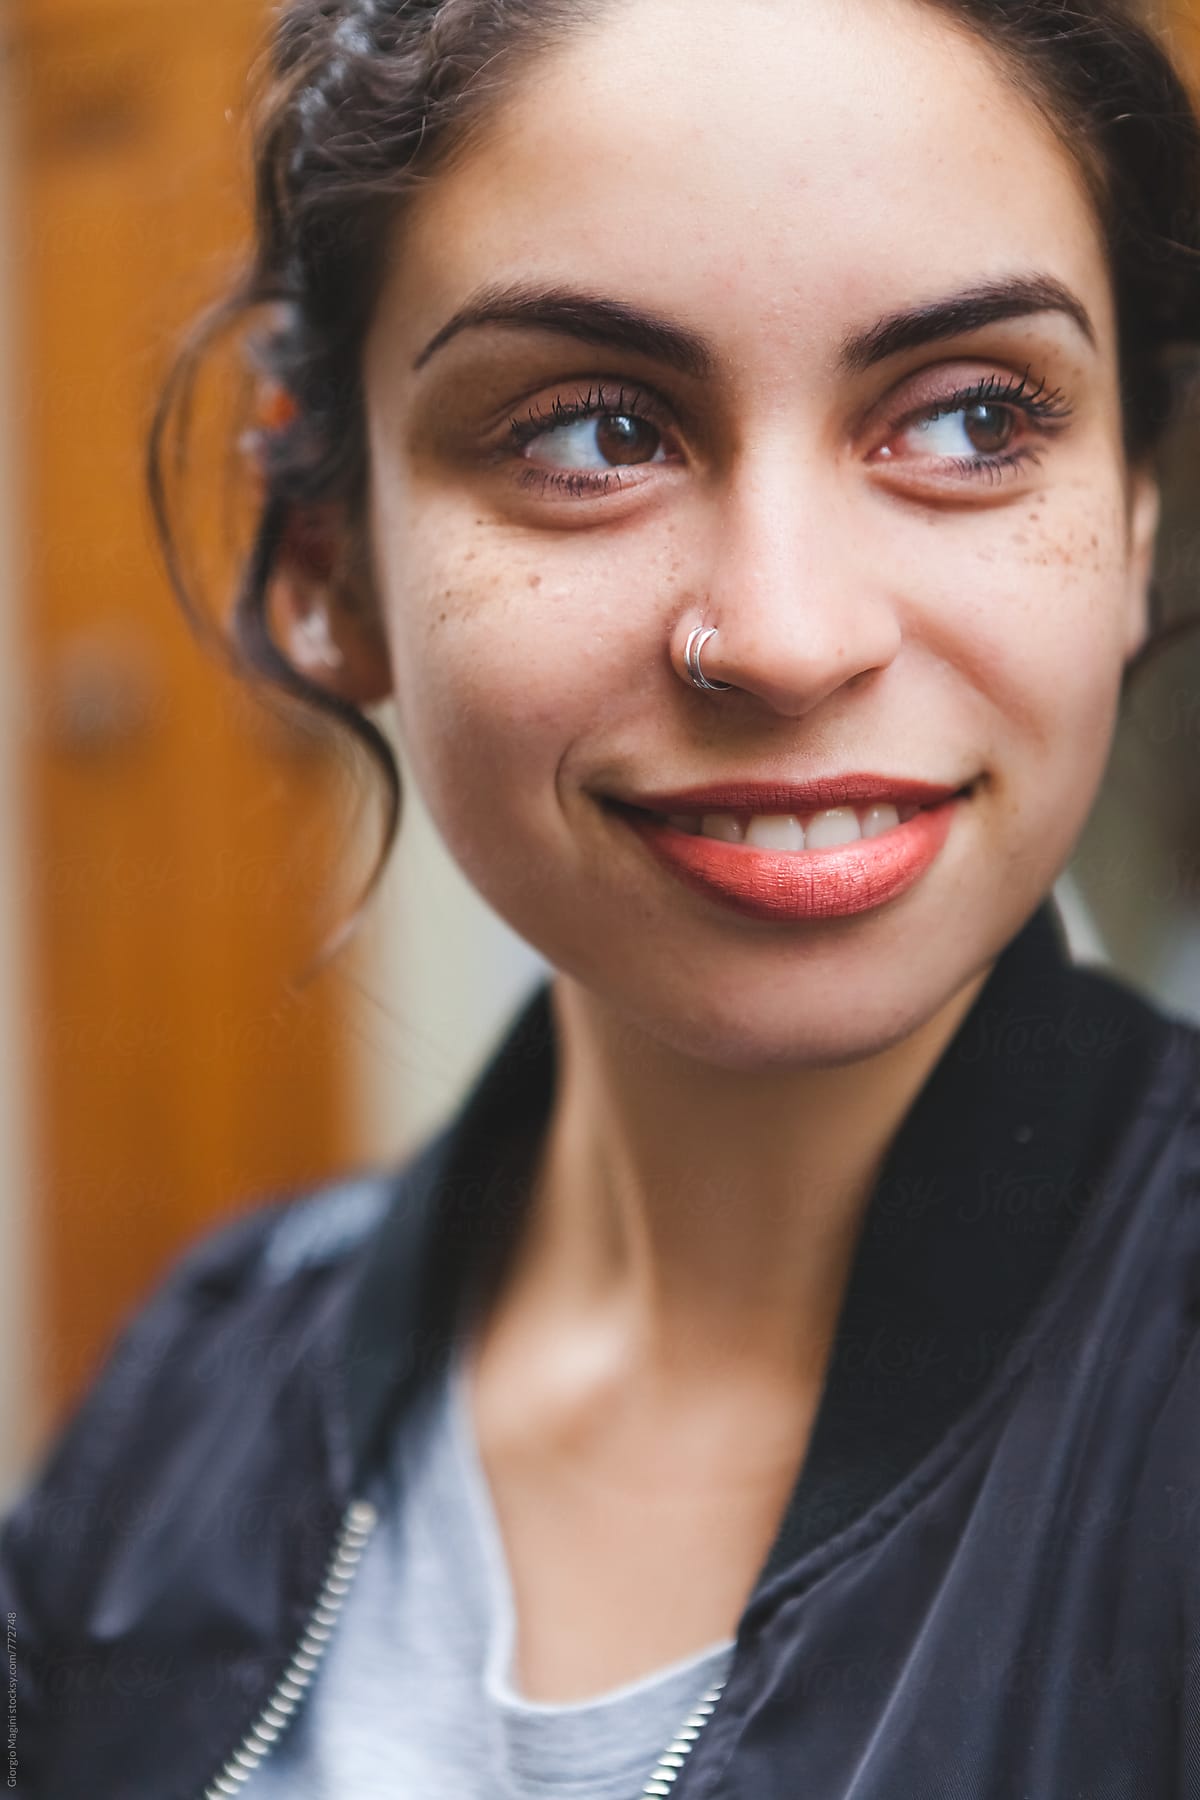 Candid Portrait Of A Smiling Mixed Race Girl By Giorgio Magini